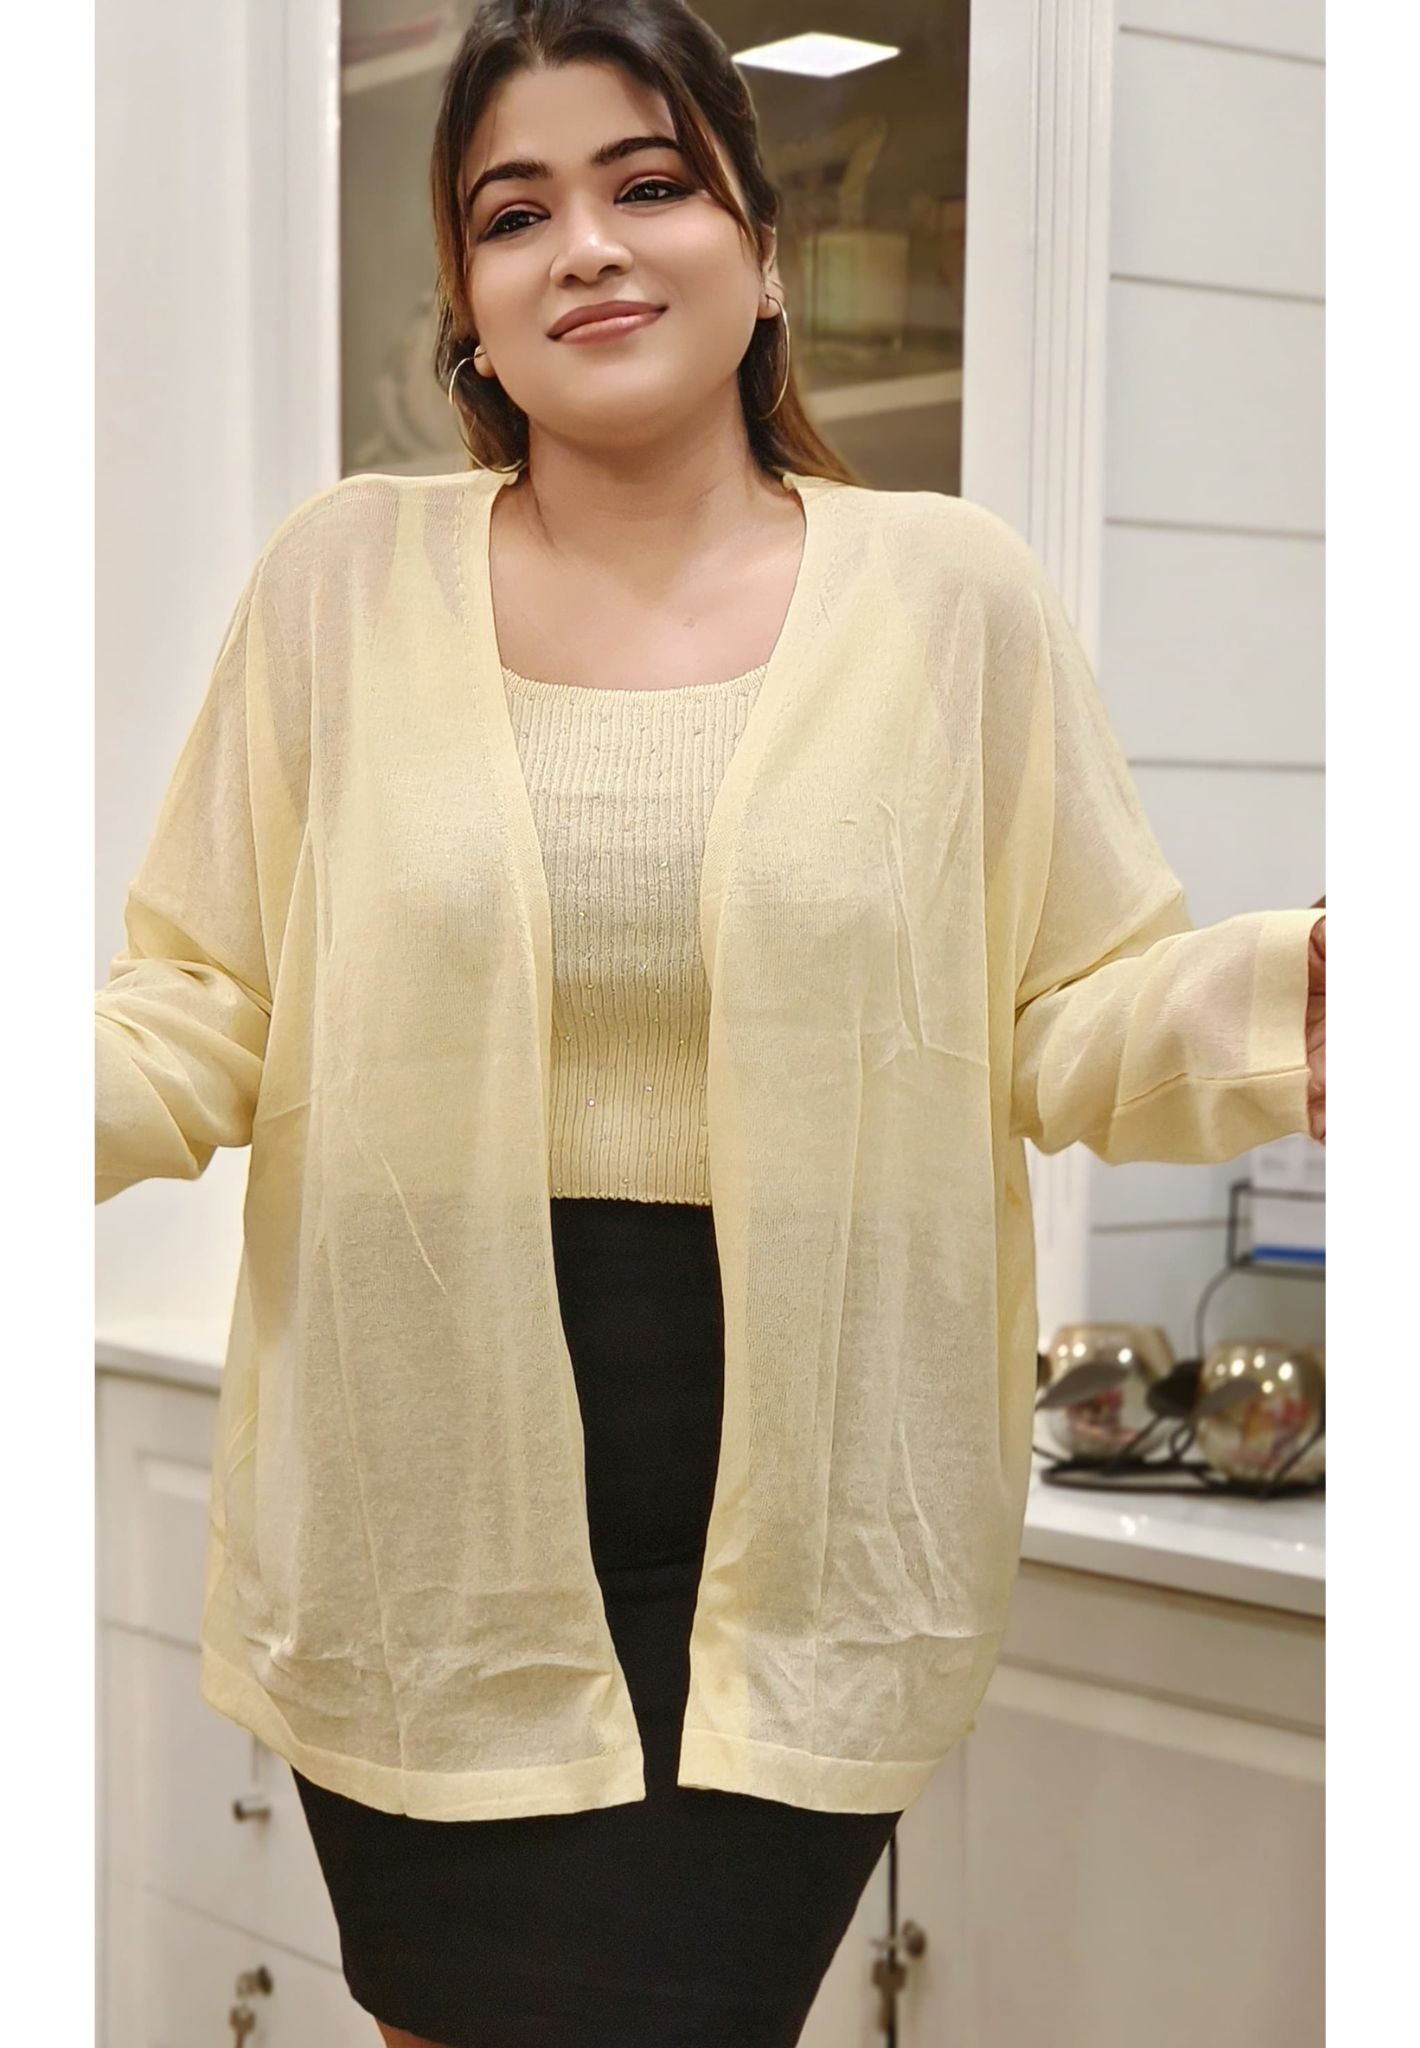 Stone Work Spegity With Shrug Imported Stretchable Top-